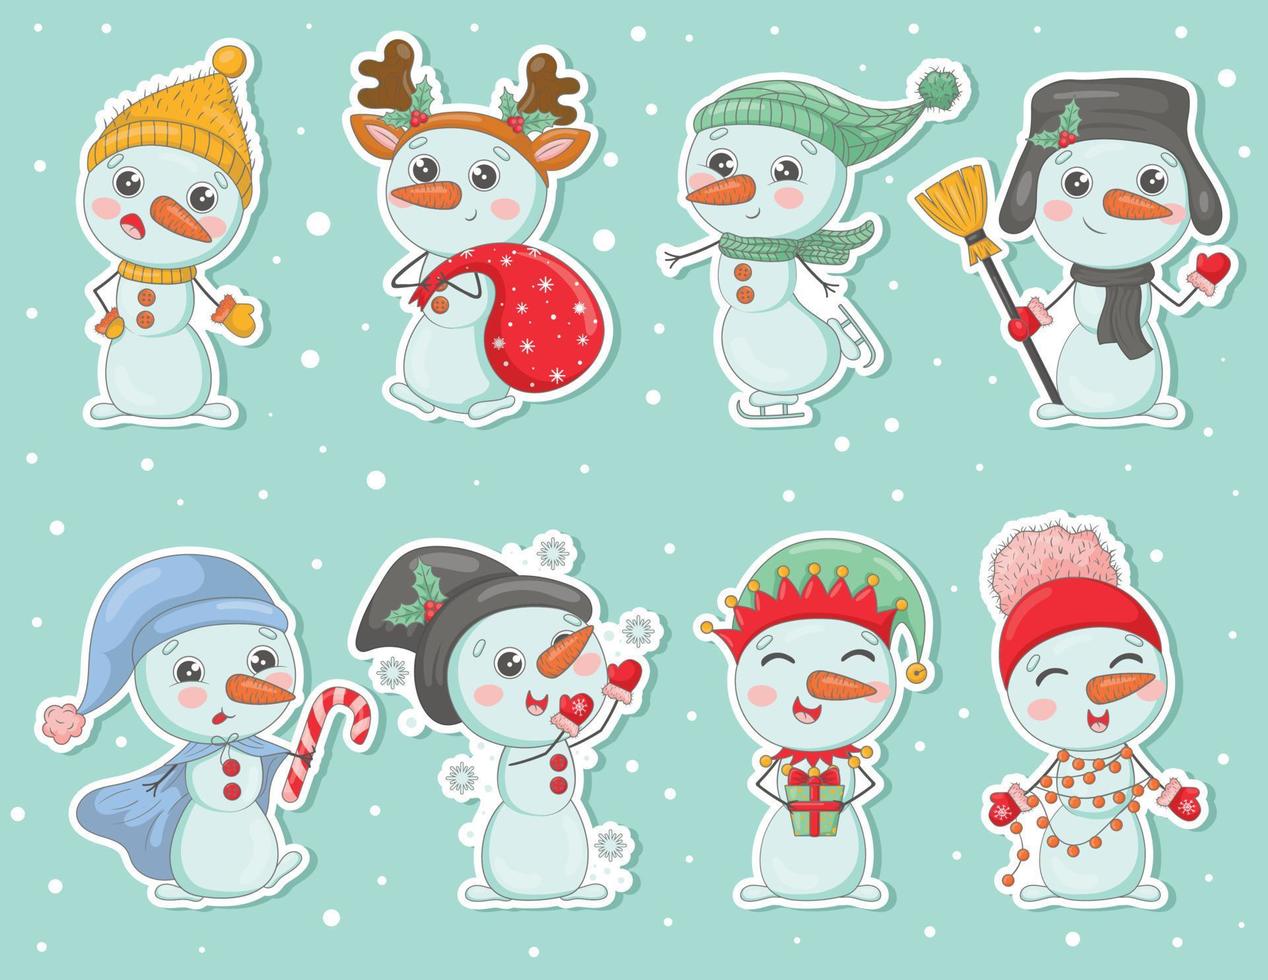 Bundle of cute cartoon snowmens stickers in knitted hats and scarves with Christmas gifts, snowflakes, holly, dressed as New Year characters vector